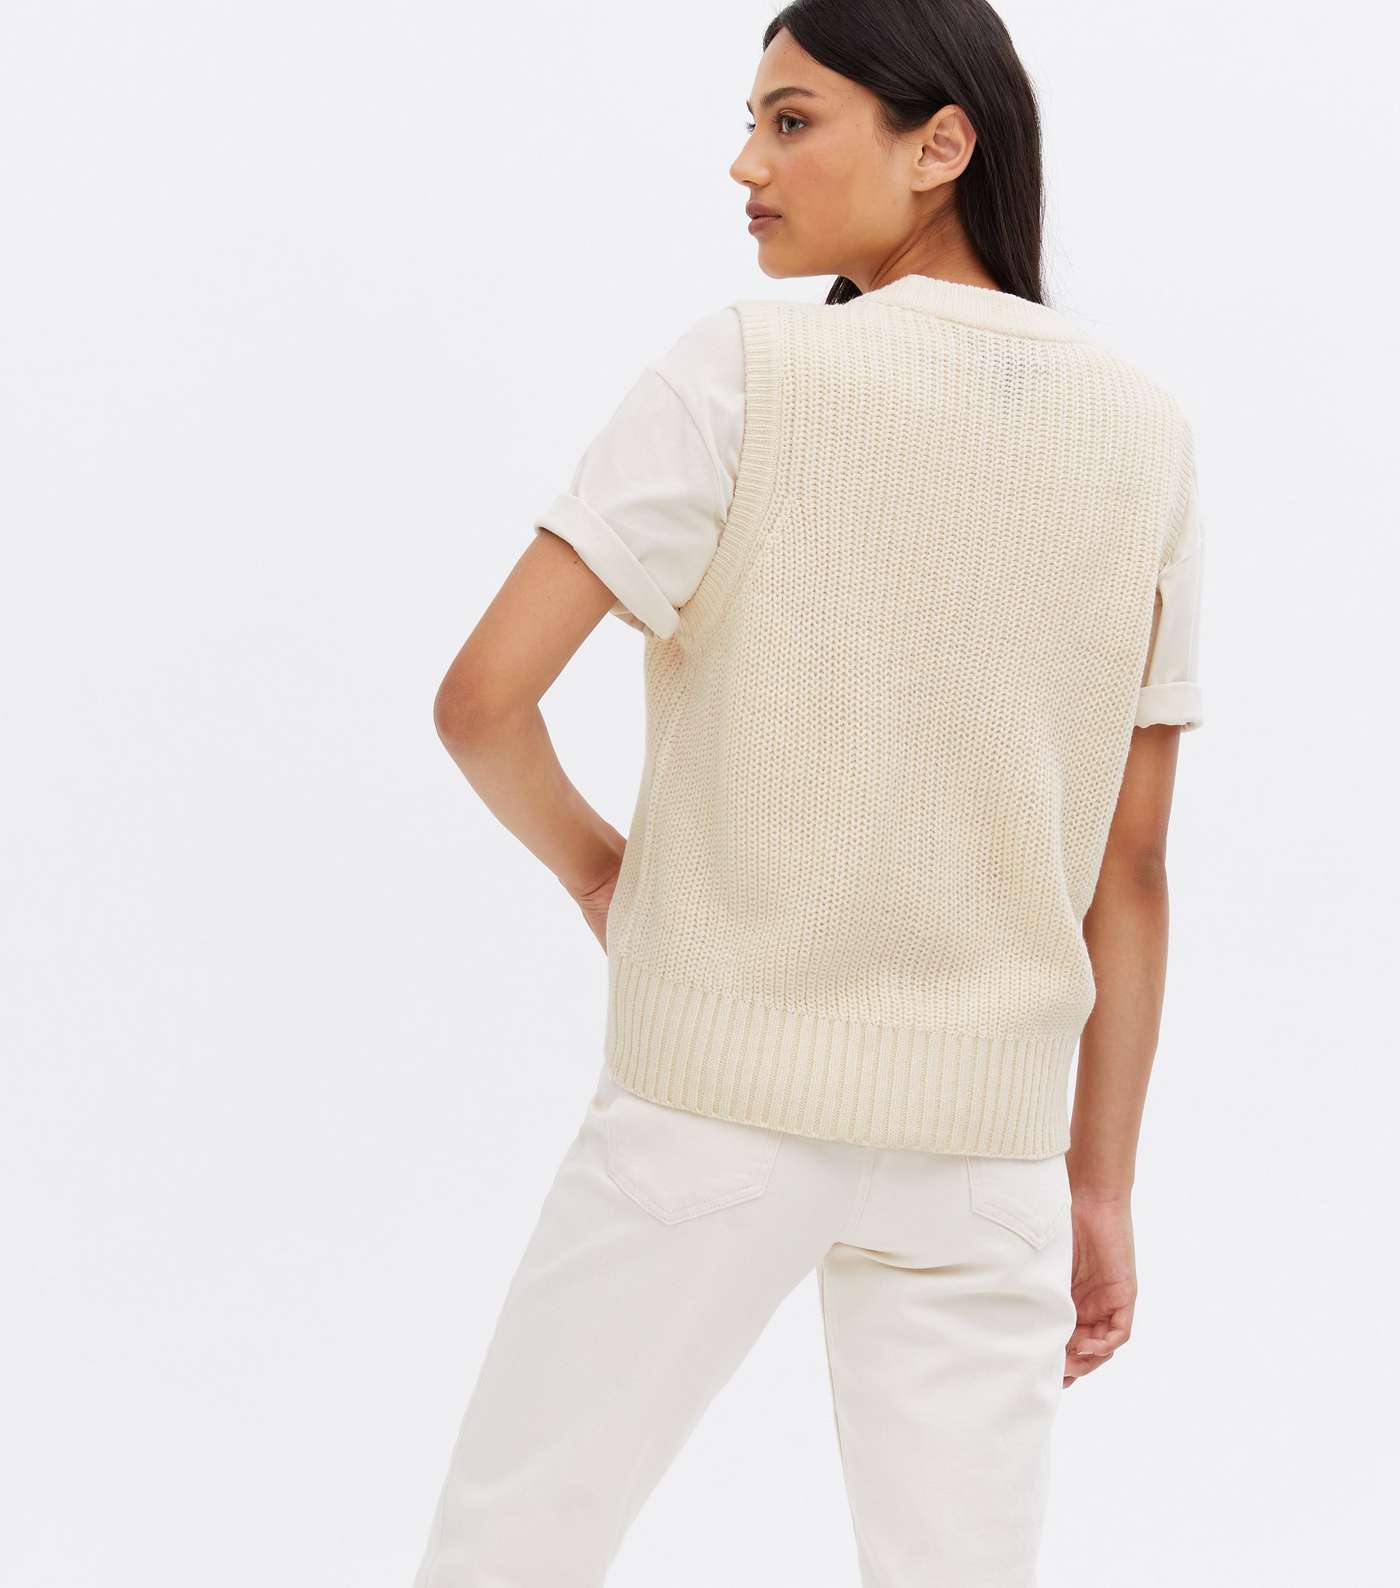 Off White Ribbed Knit Button Long Sleeveless Vest Image 4